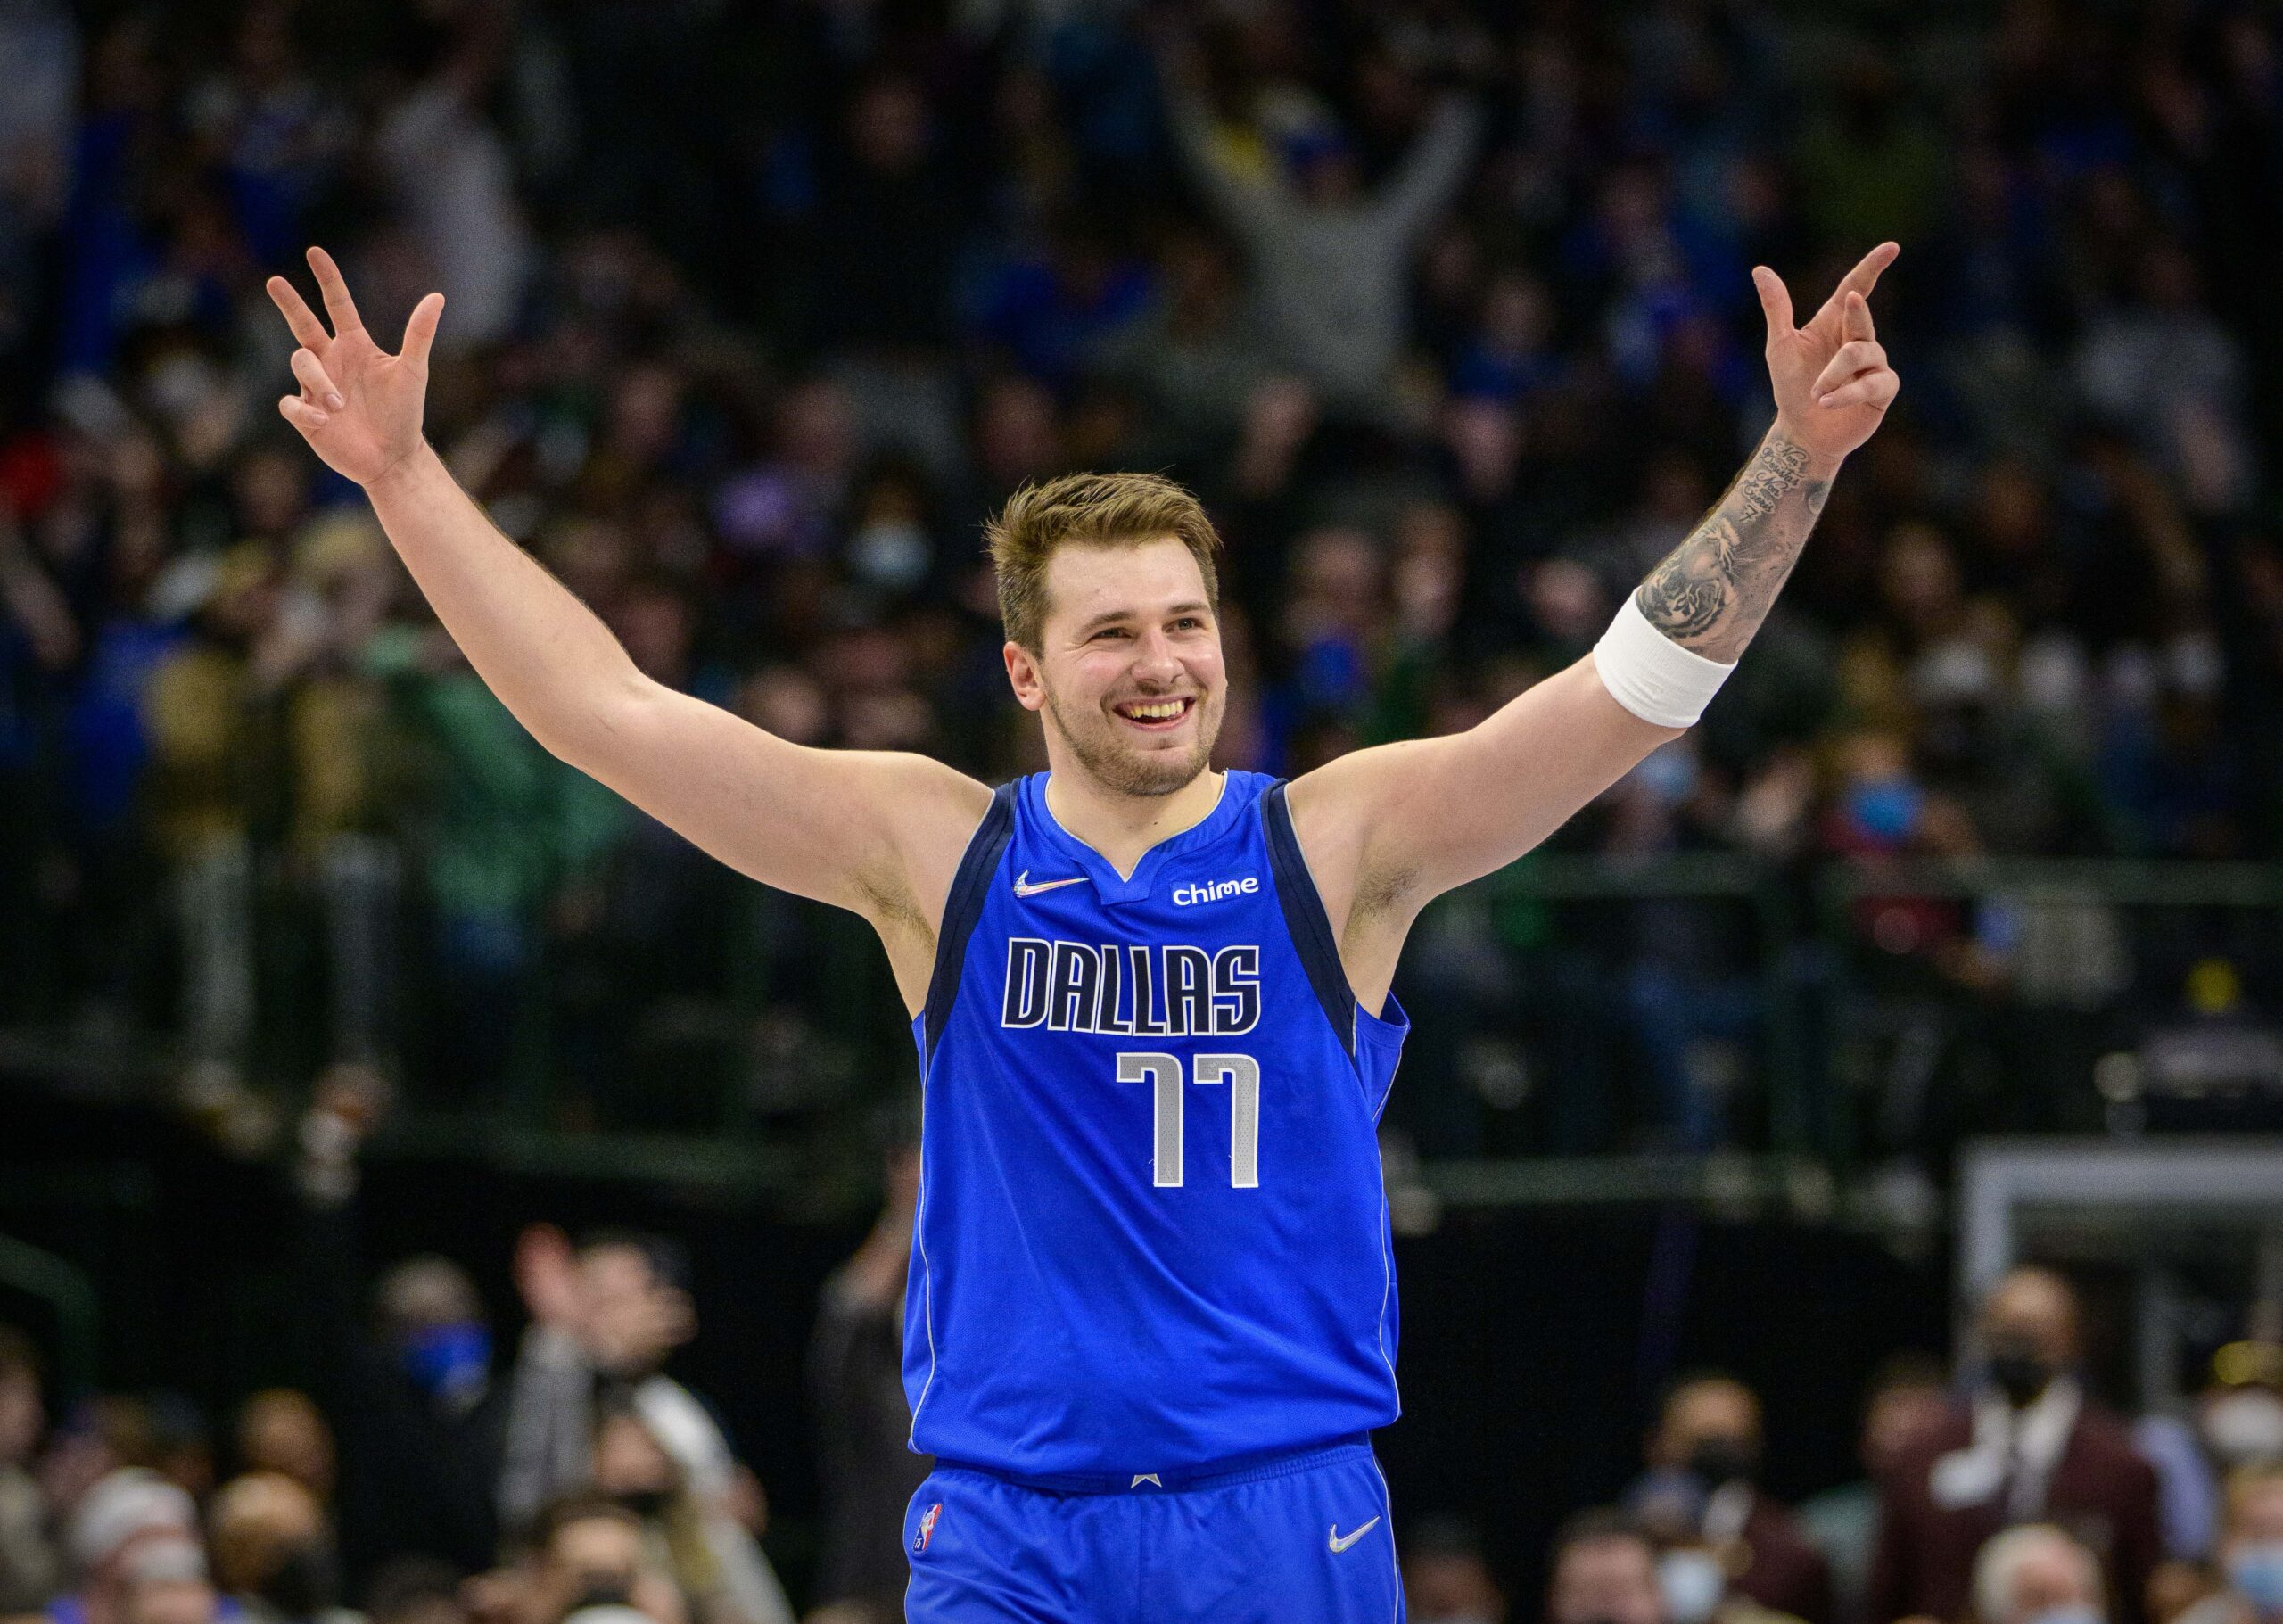 Presenting 23 Sentences About Luka Doncic on His 23rd Birthday - D Magazine